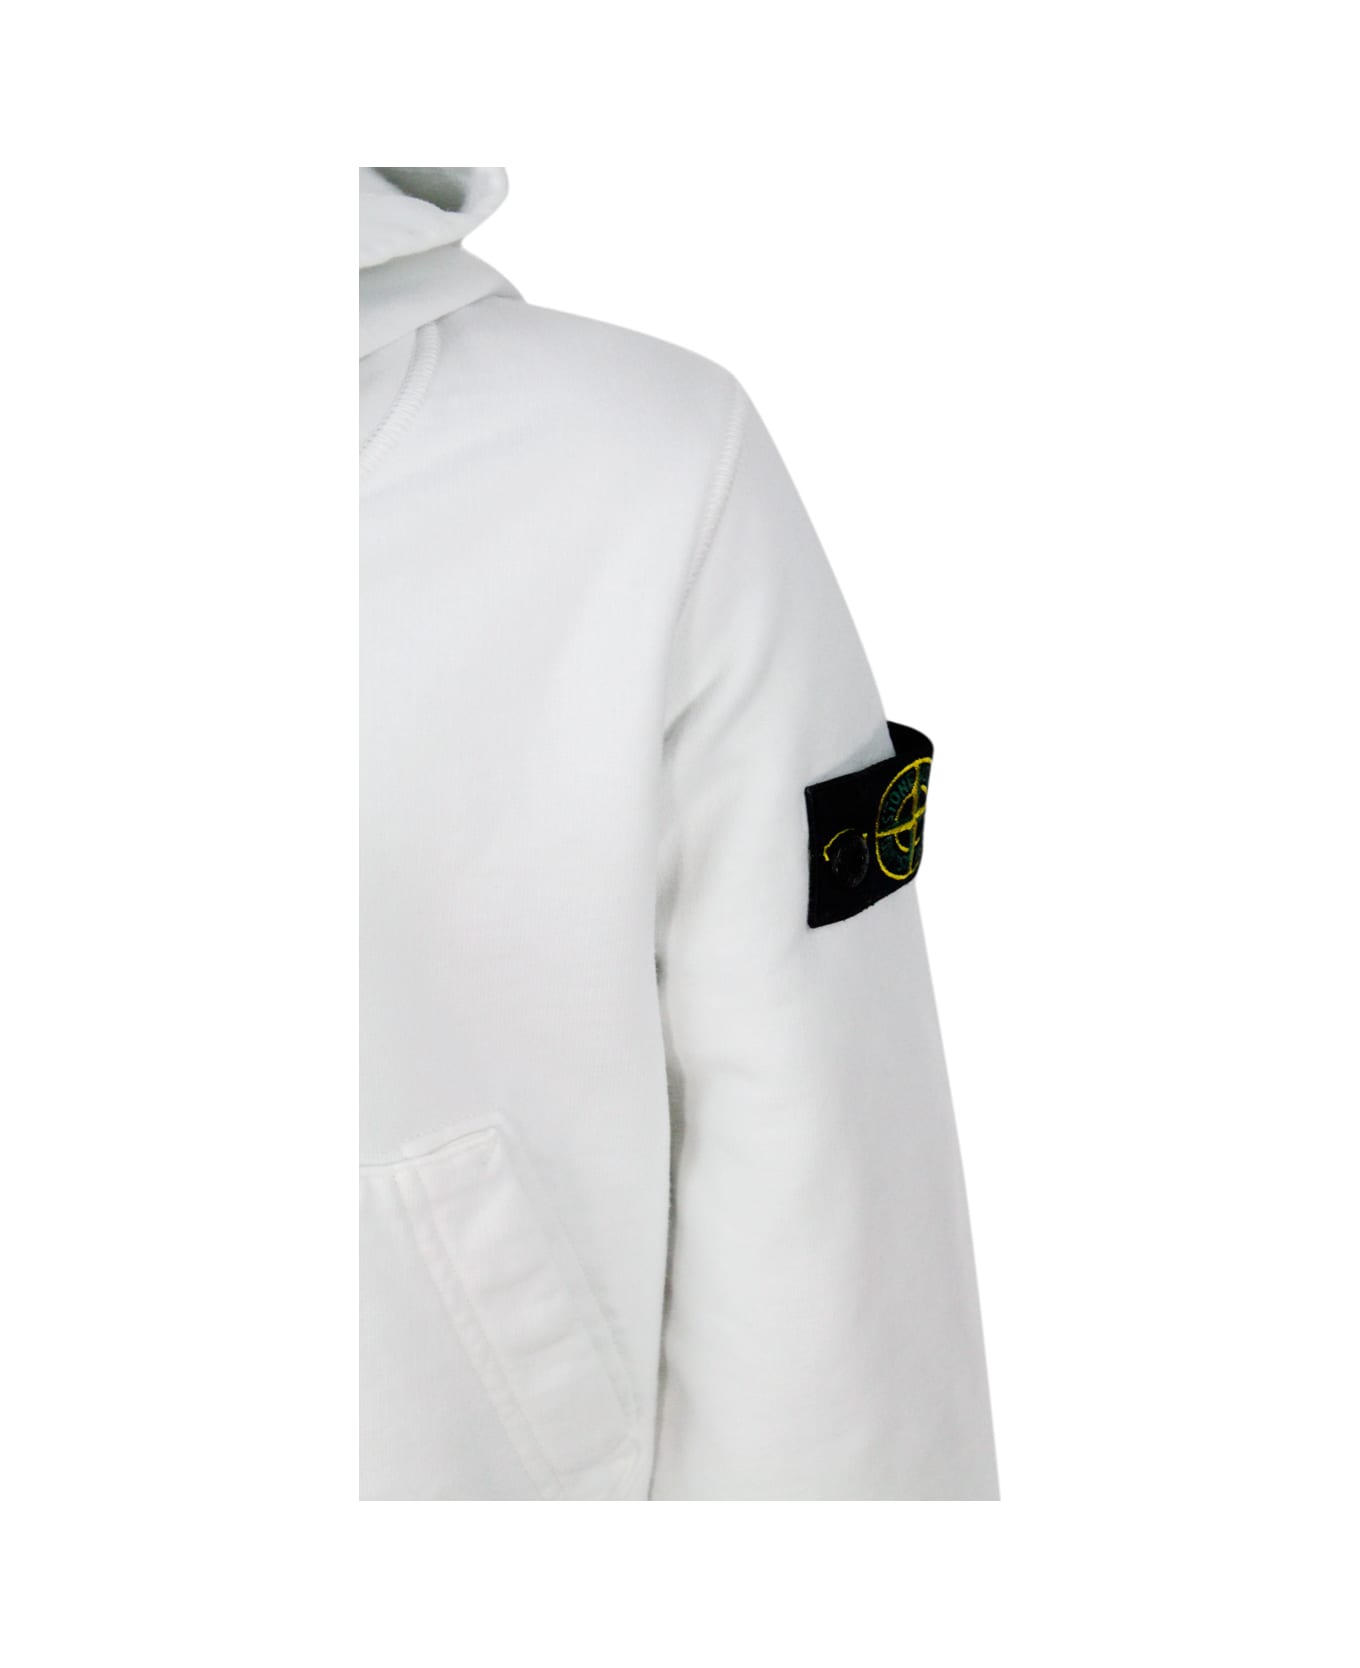 Stone Island khaki Hooded Sweatshirt With Long Sleeves In Stretch Cotton With Badge On The Left Sleeve - White